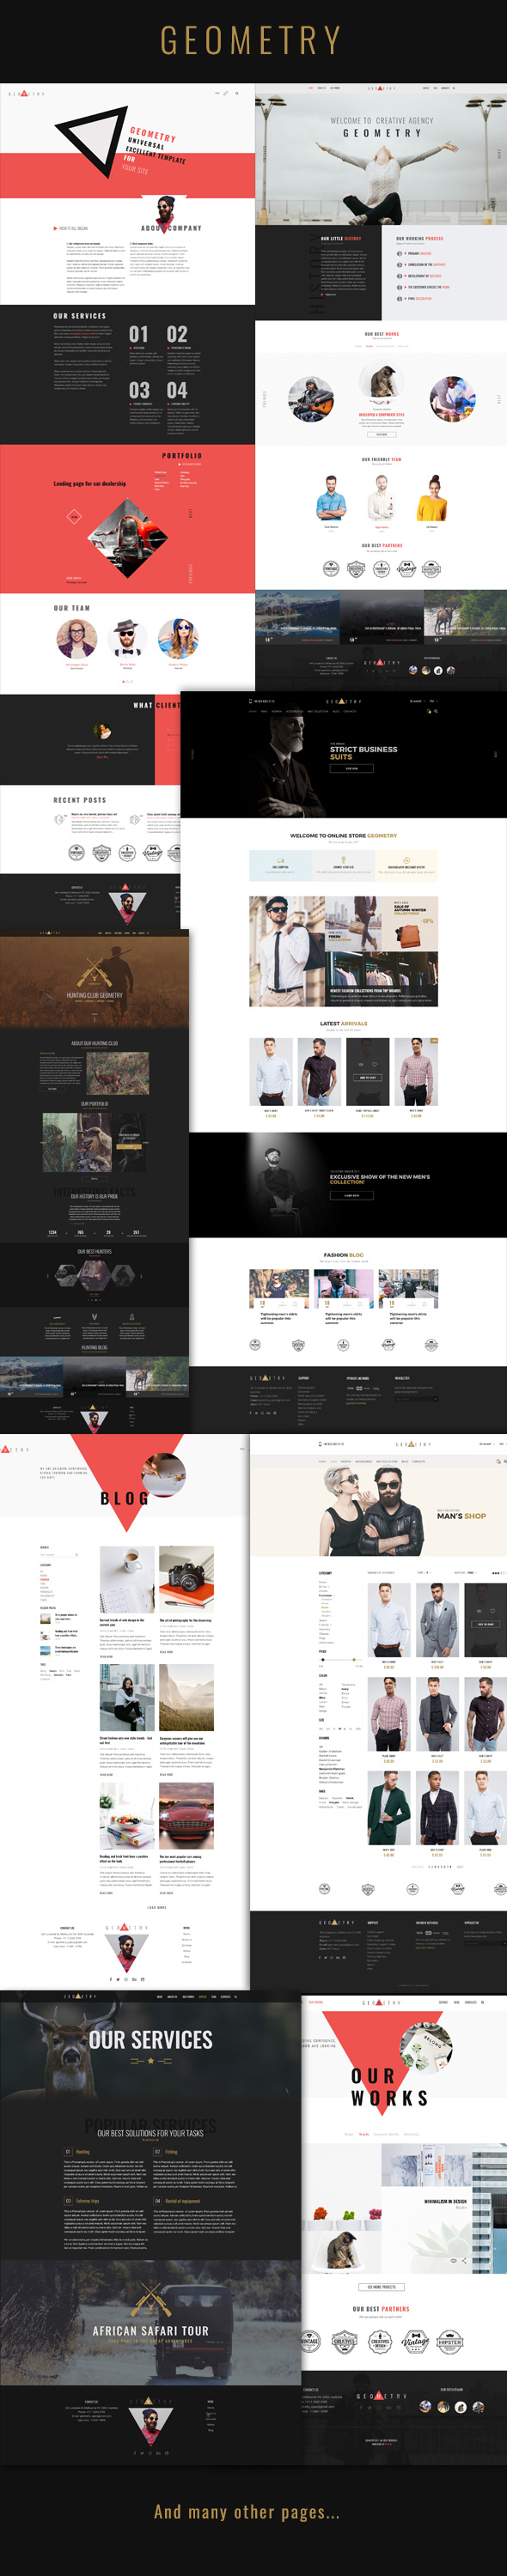 Geometry - multiresponcive psd template